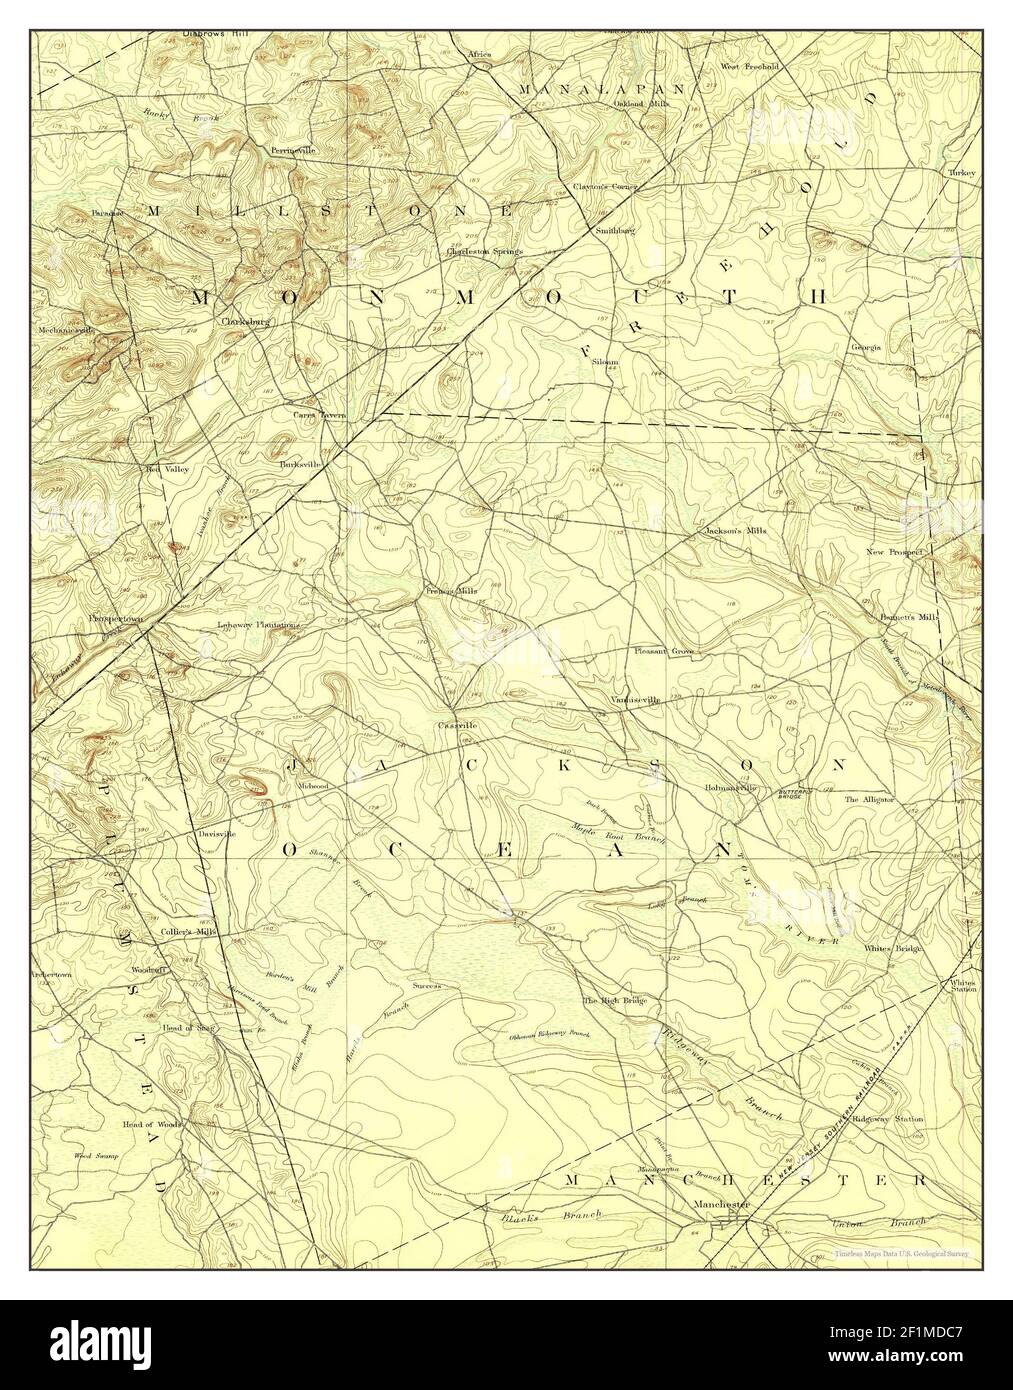 Cassville, New Jersey, map 1888, 1:62500, United States of America by Timeless Maps, data U.S. Geological Survey Stock Photo